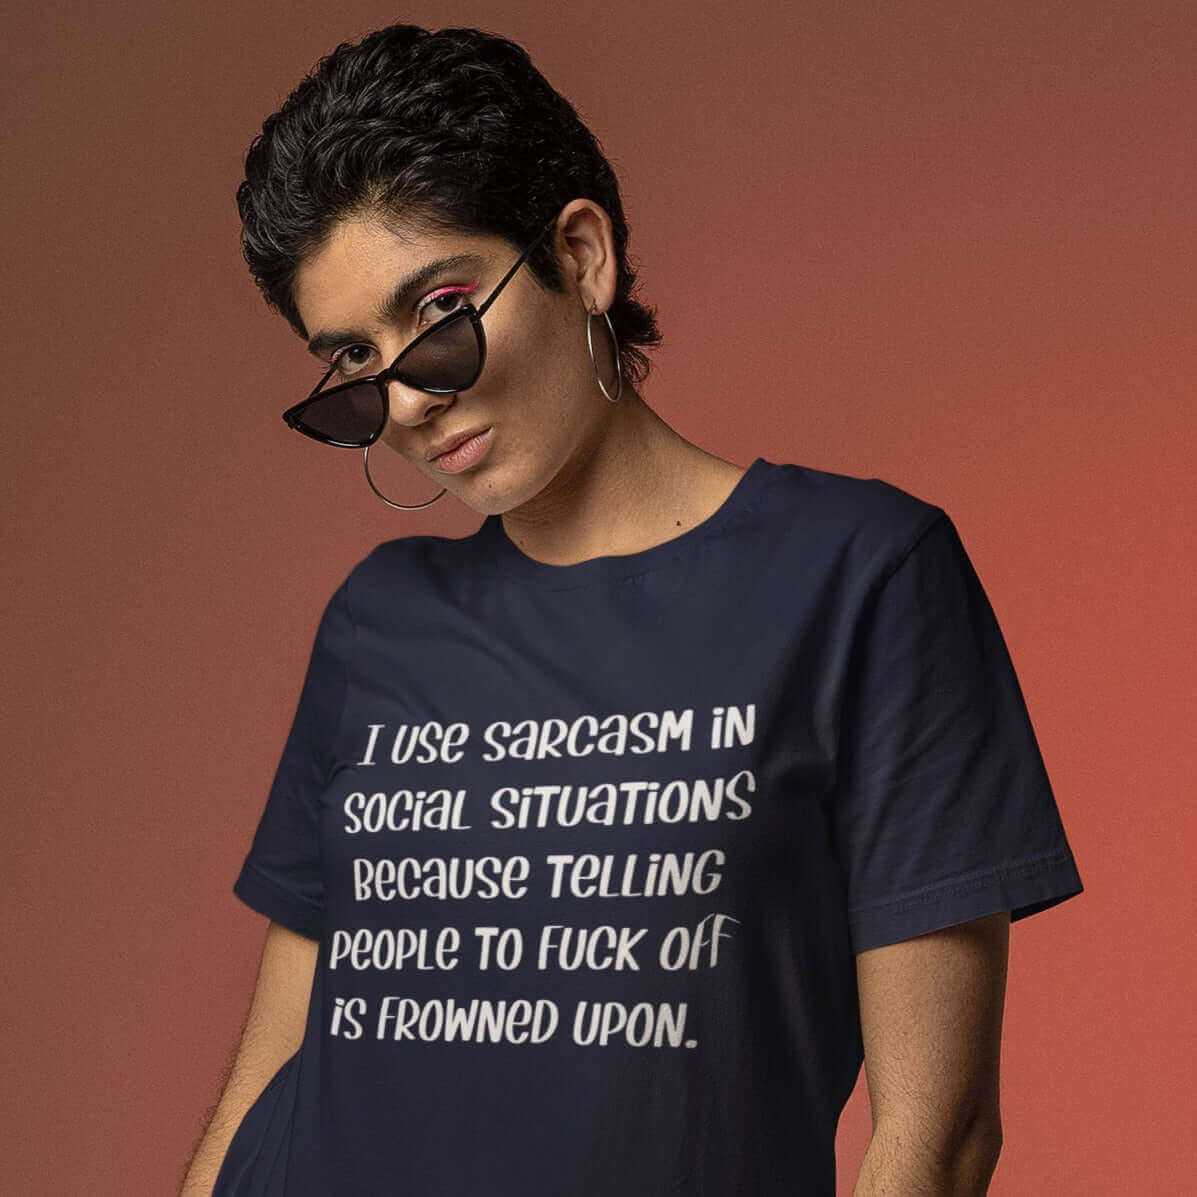 Short haired woman wearing navy blue t-shirt with the phrase I use sarcasm in social situations because telling people to fuck off is frowned upon printed on the front.